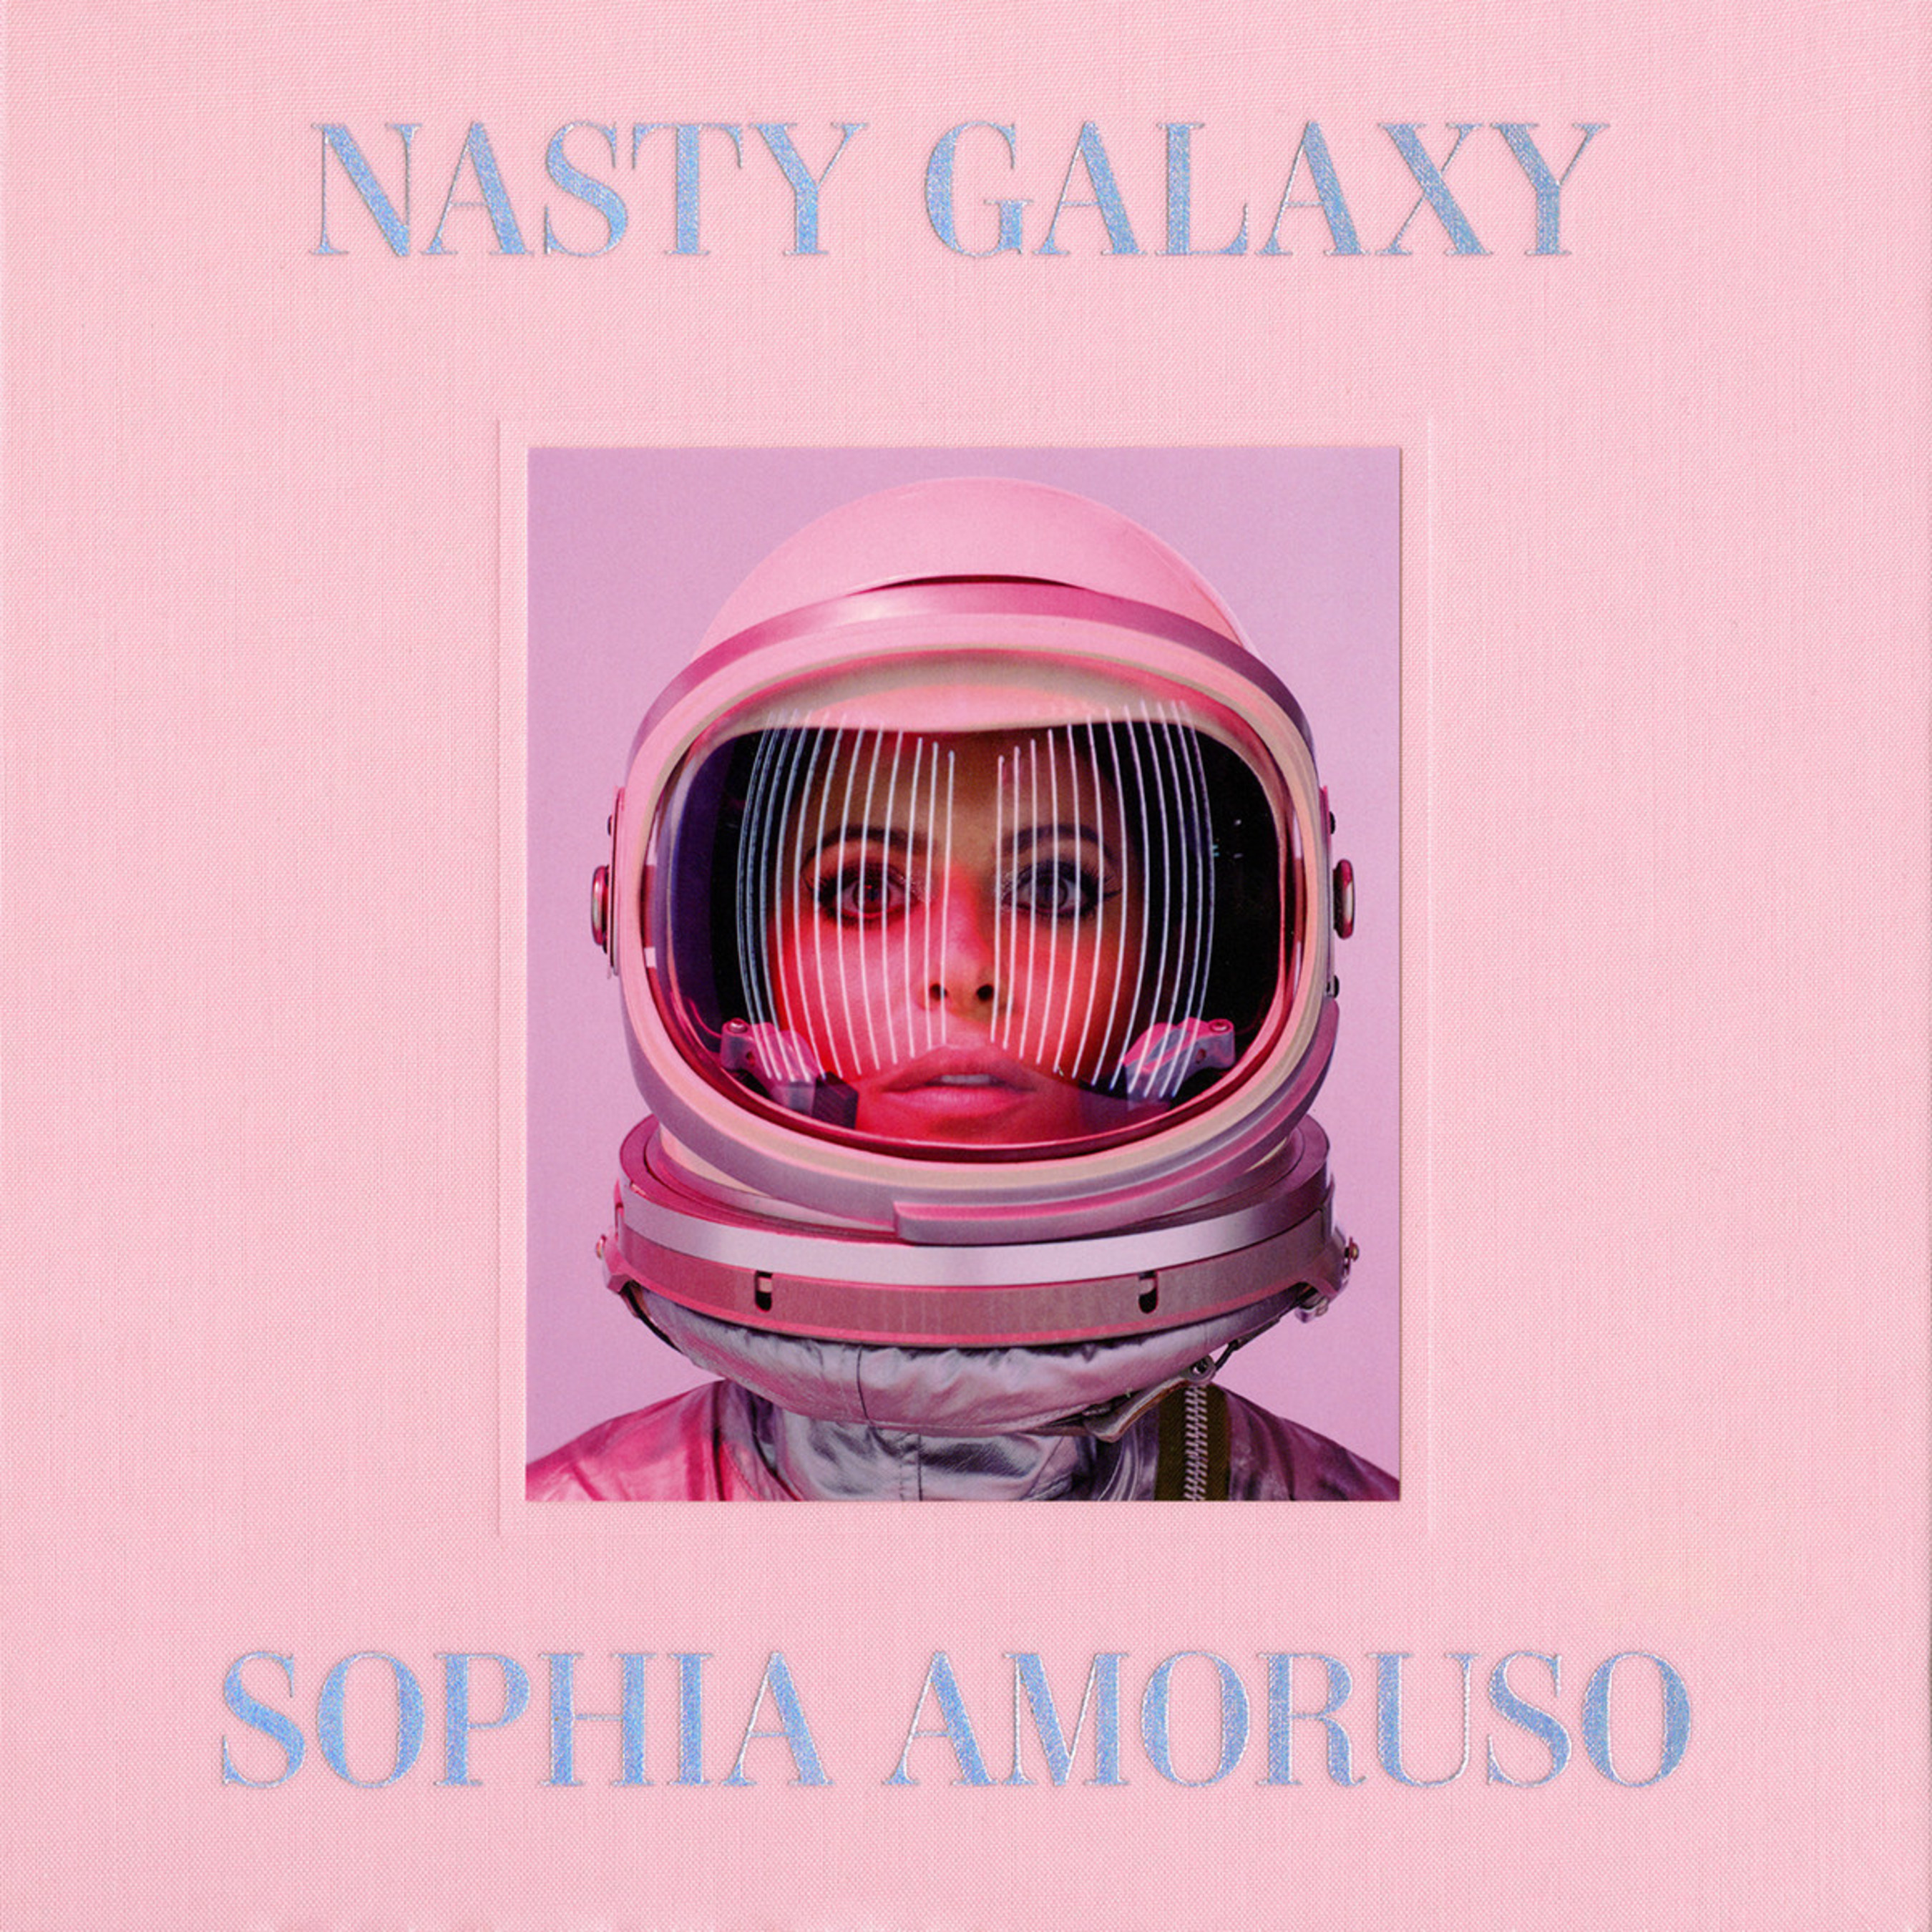 Nasty Gal Founder and Executive Chairman Sophia Amoruso to sign Nasty Galaxy, her latest must-read book, at ONTRAPORT's Modern Marketing Summit, October 13, 2016, in Santa Barbara